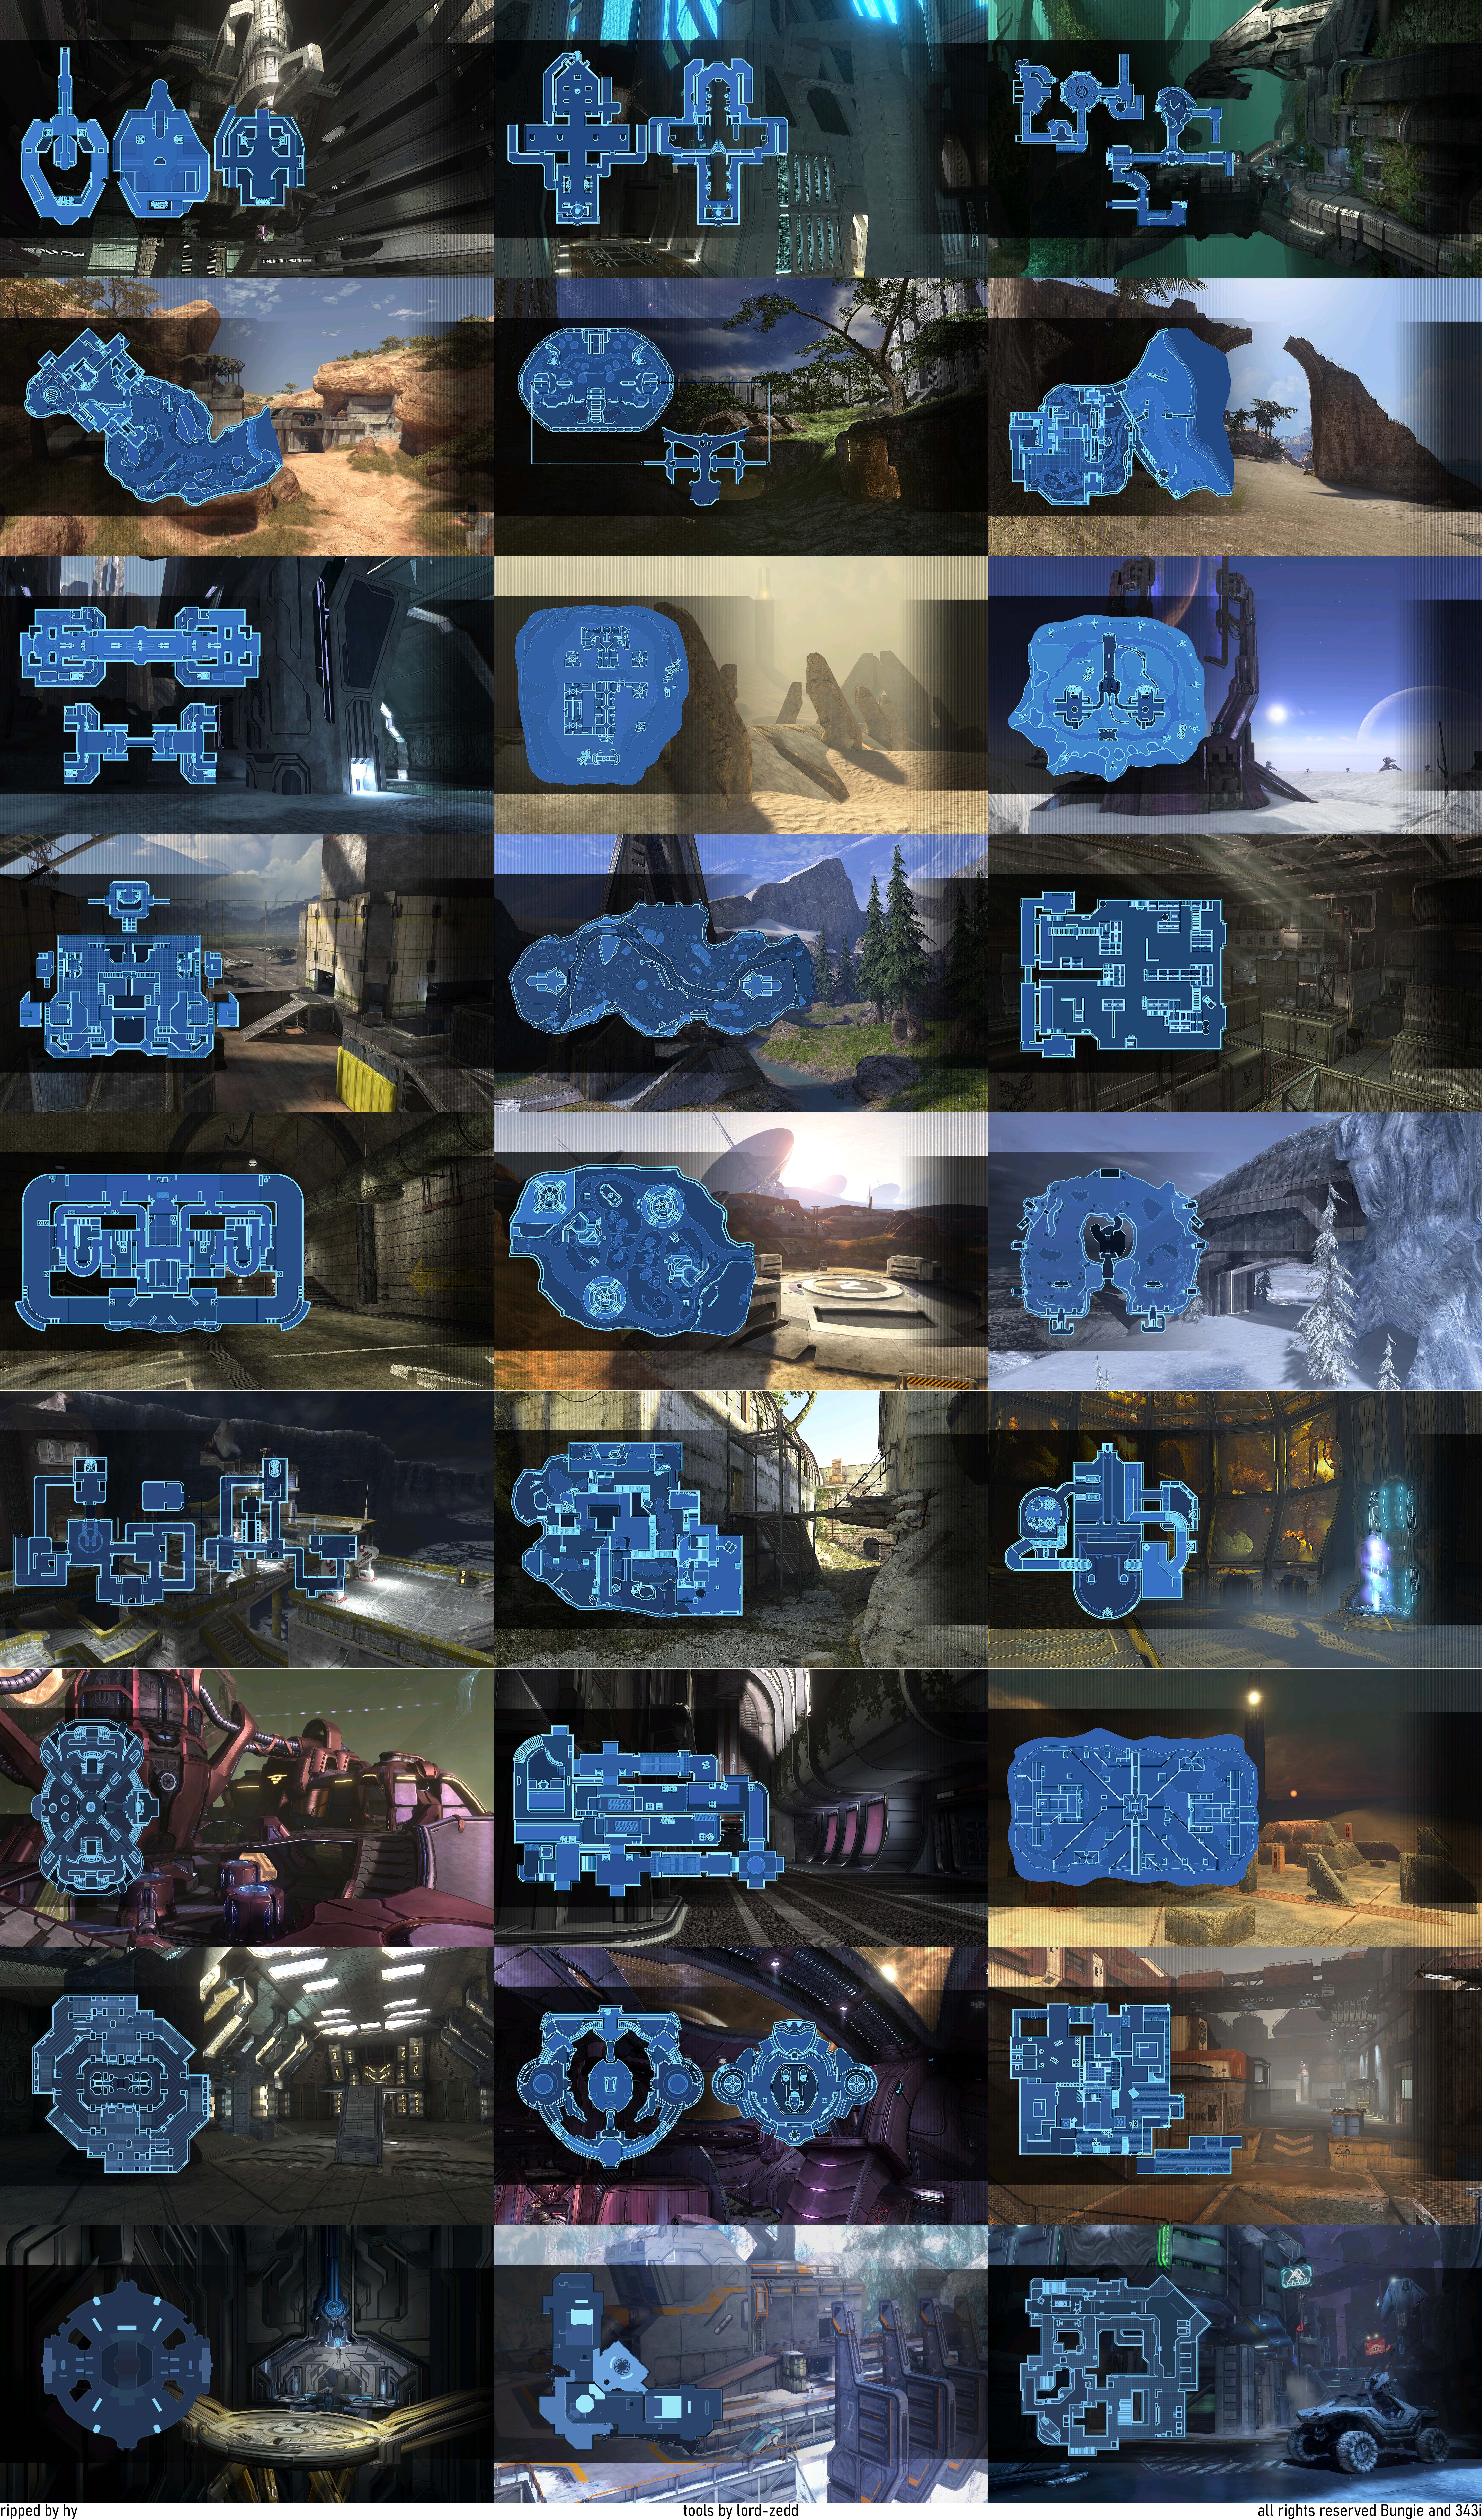 Halo: The Master Chief Collection - Halo 3 Multiplayer Level Loading Screens